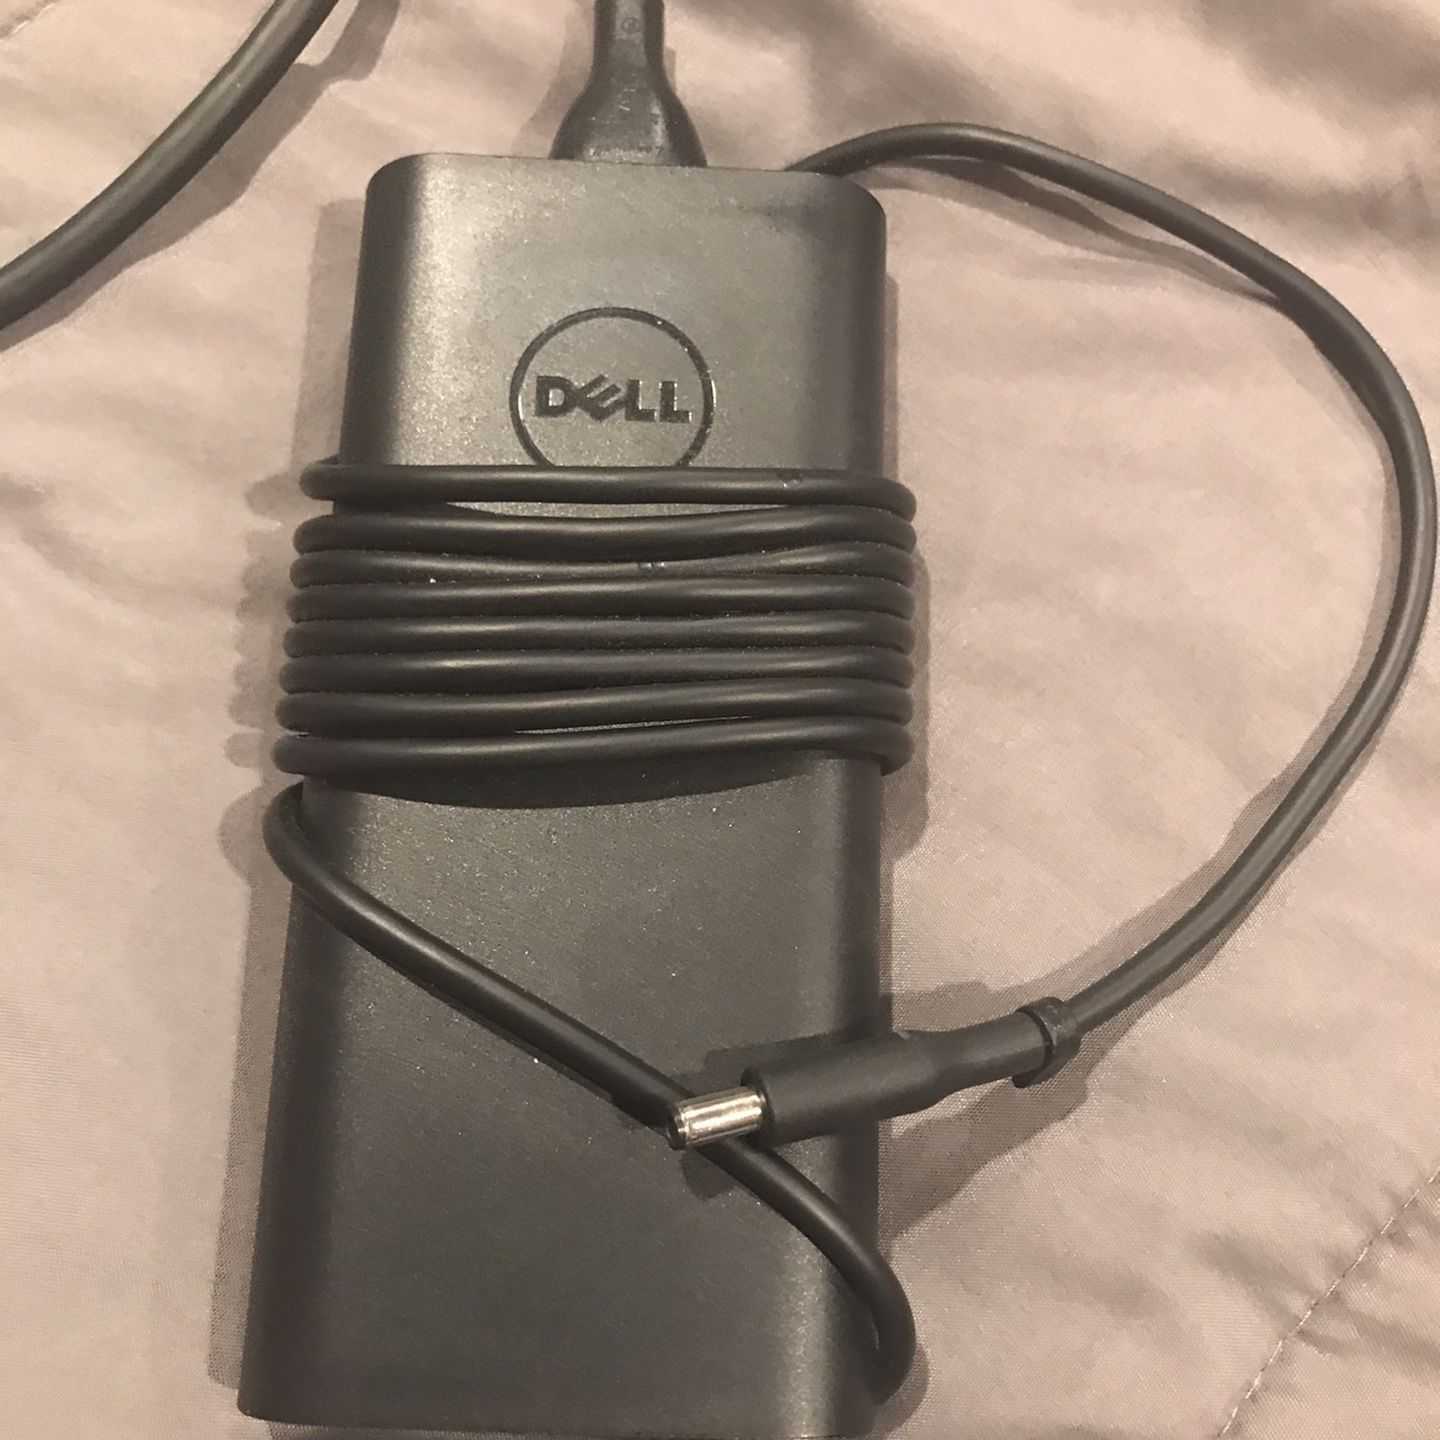 Original Dell Laptop Charger 130w